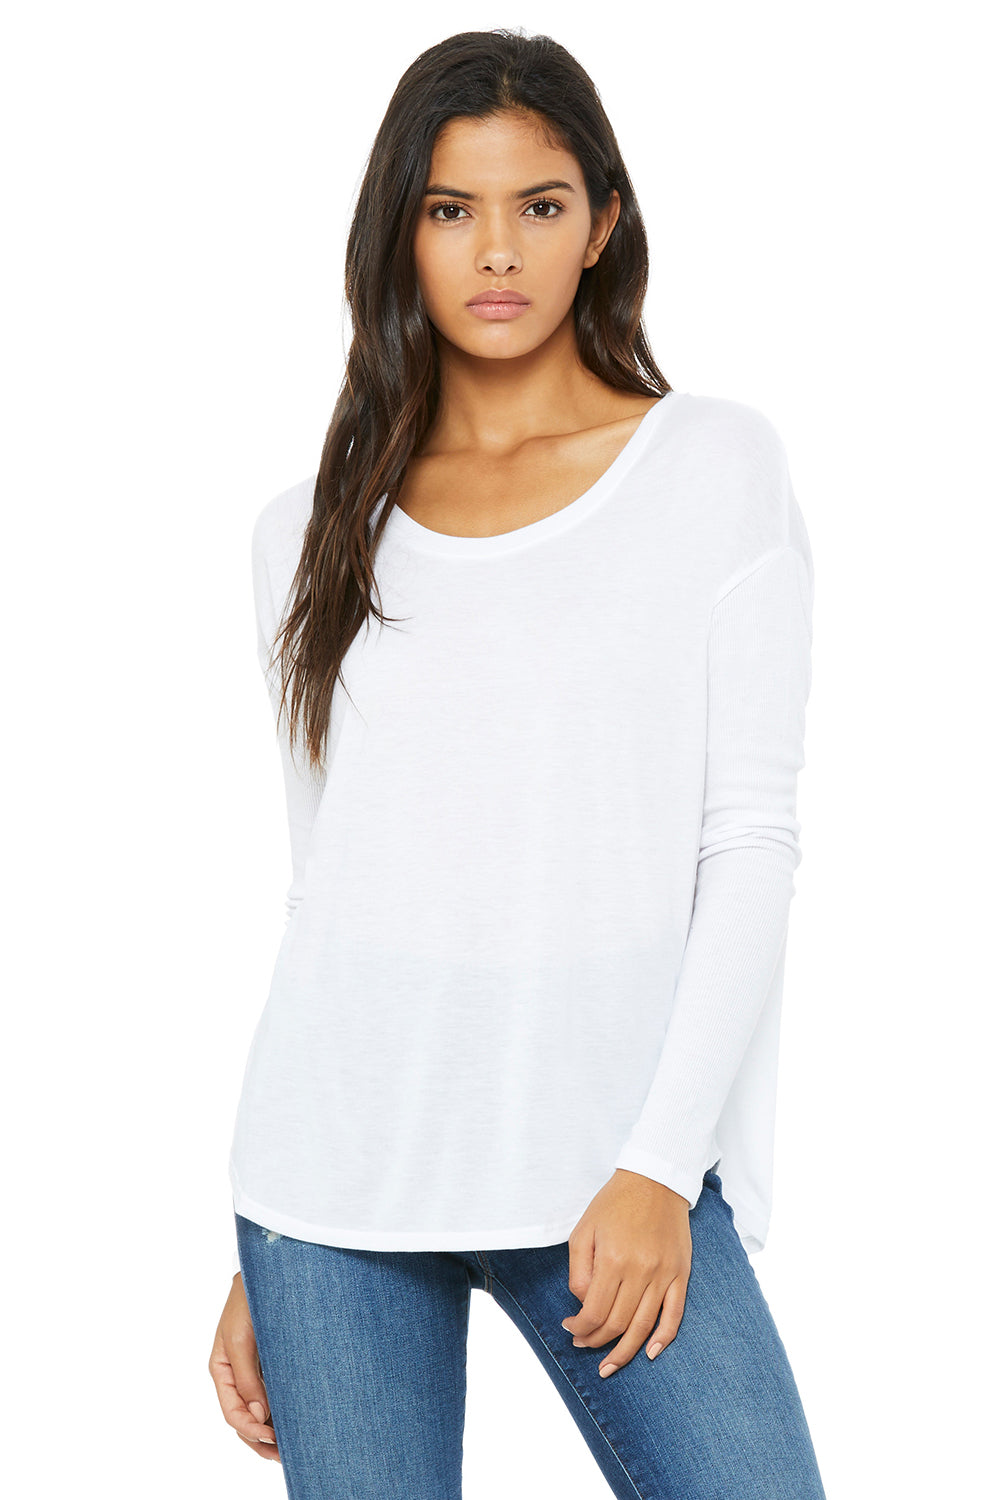 Bella + Canvas 8852 Womens Flowy Long Sleeve Wide Neck T-Shirt White Front